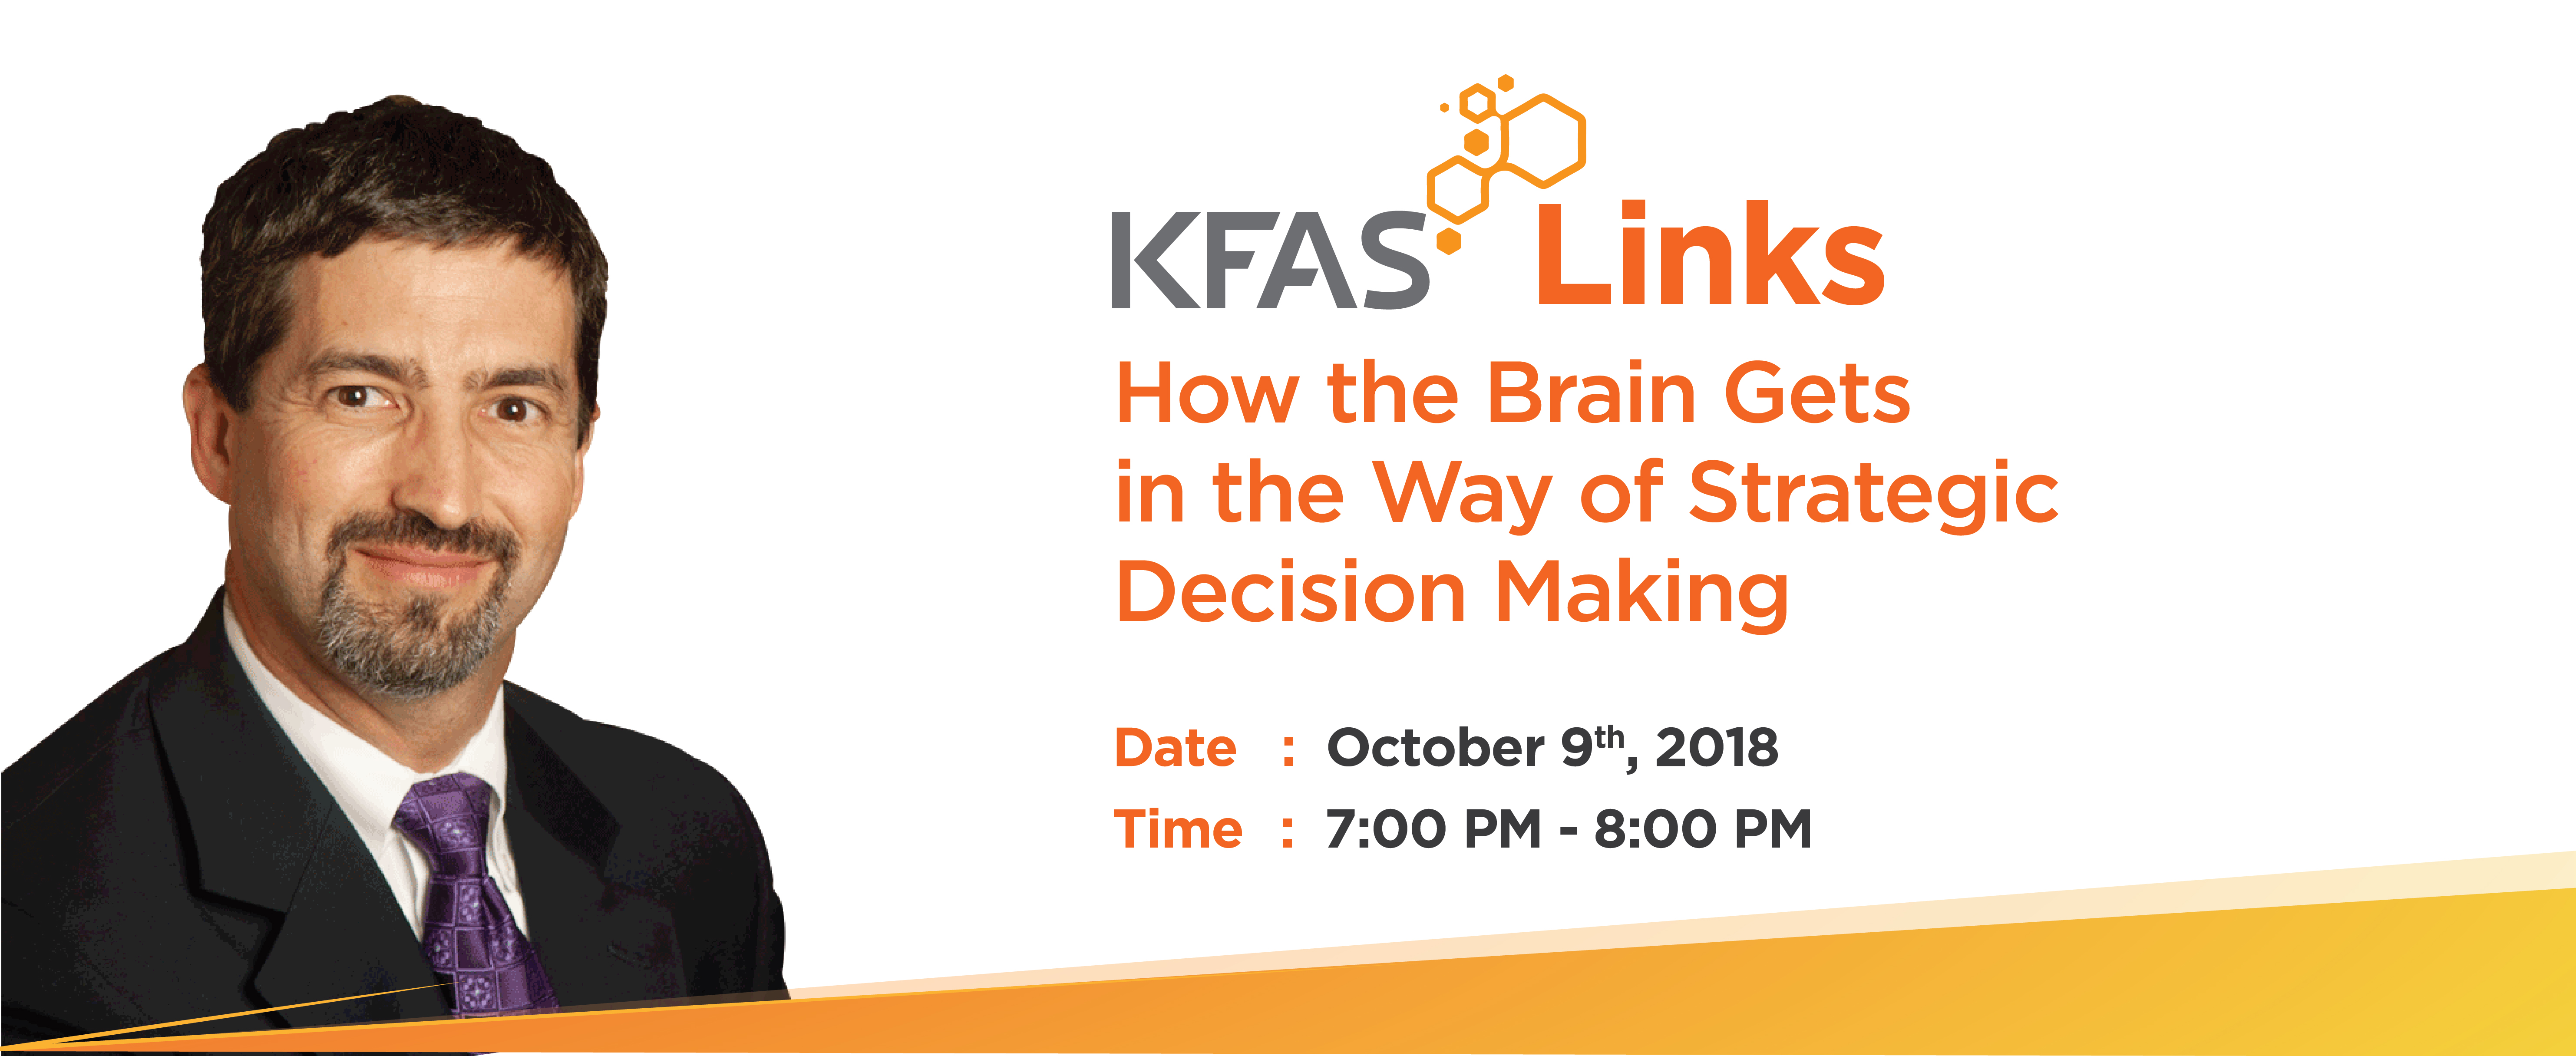 How the Brain Gets in the Way of Strategic Decision Making